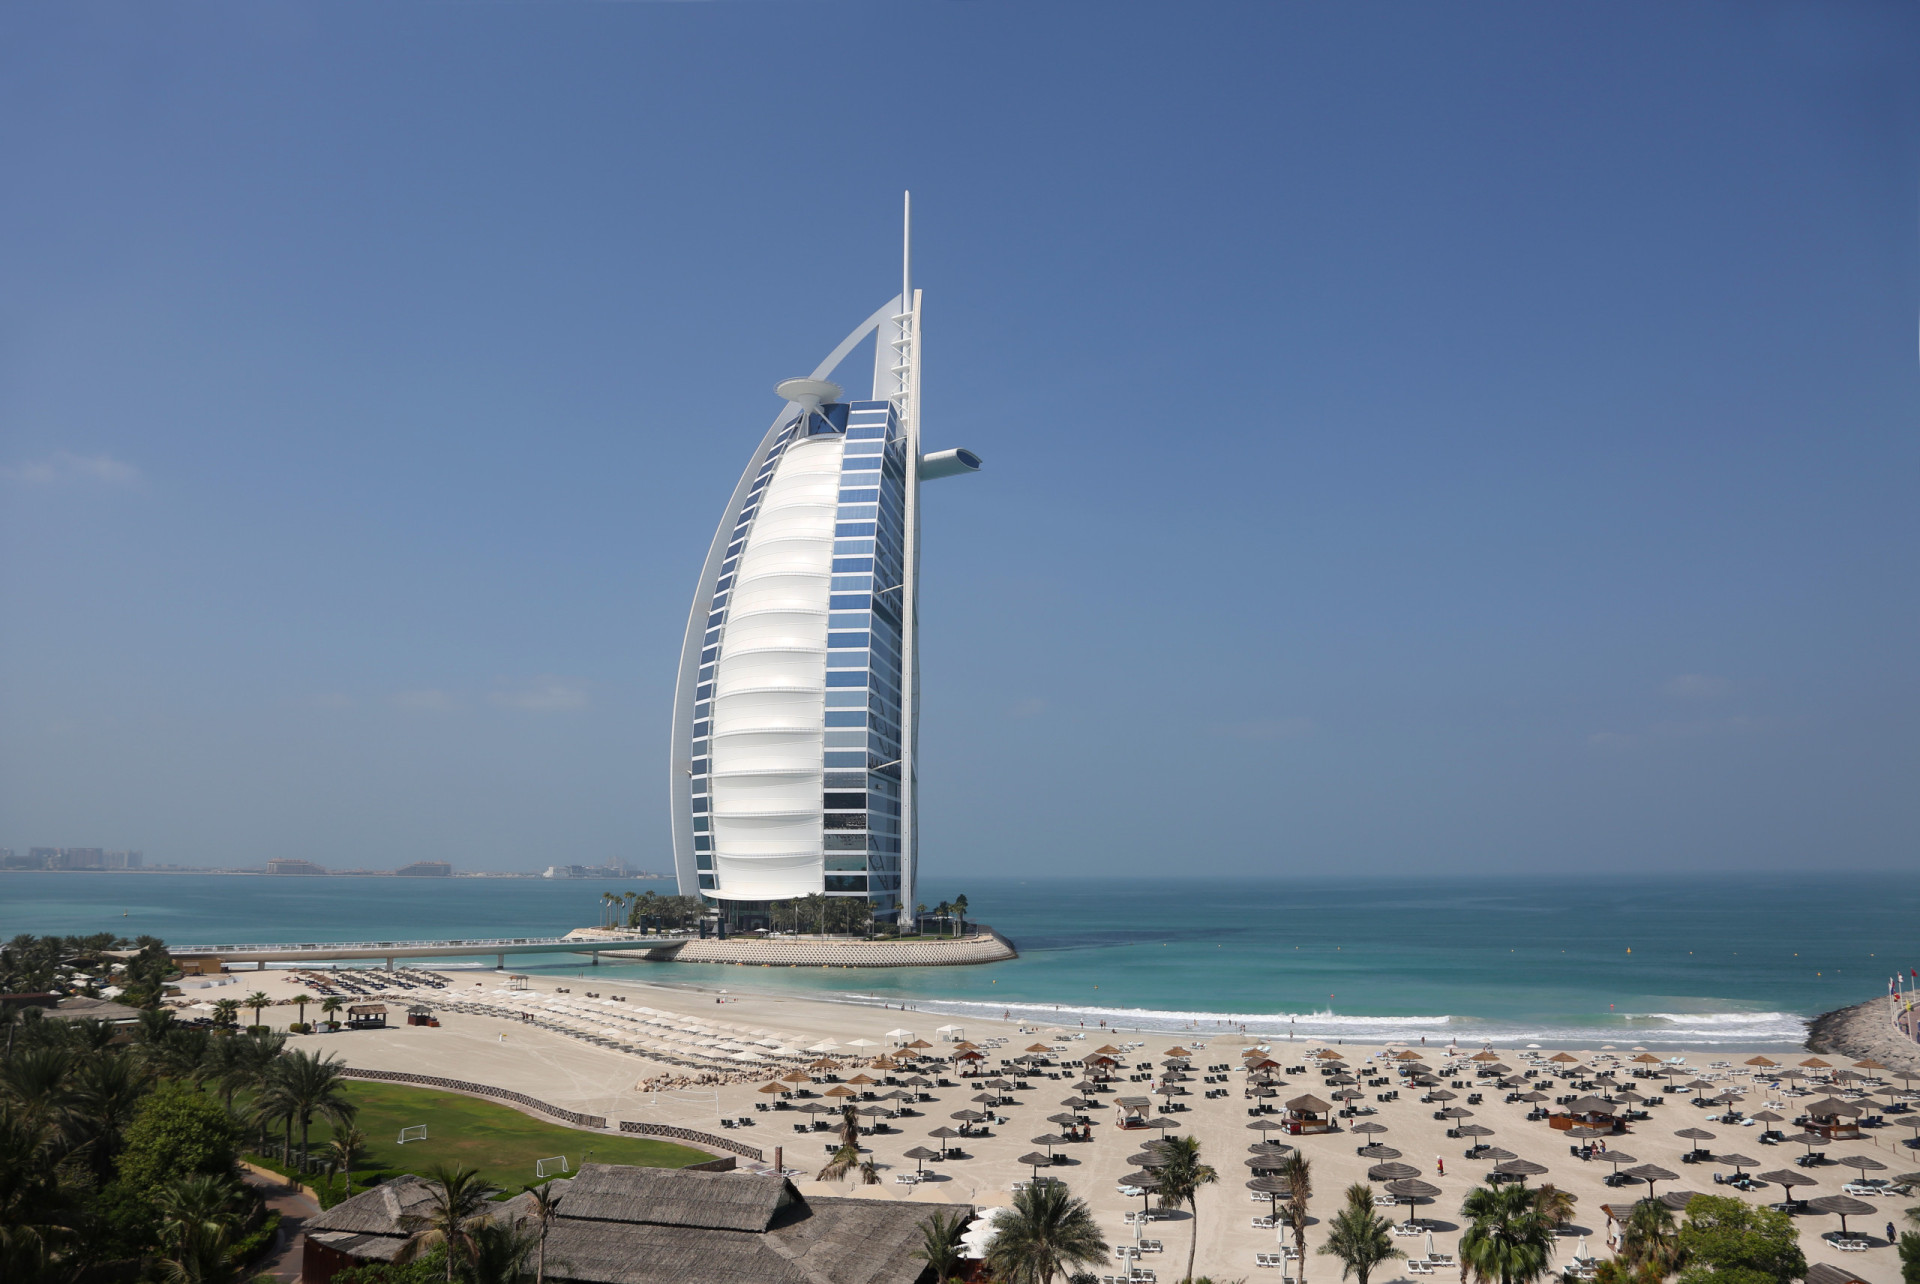 <p>Live like royalty at one of the few seven-star hotels in the world, Burj-Al-Arab in Dubai. The spacious Royal Suite is on the 25th floor and is dripping in 22-karat gold. Pure luxury.</p>